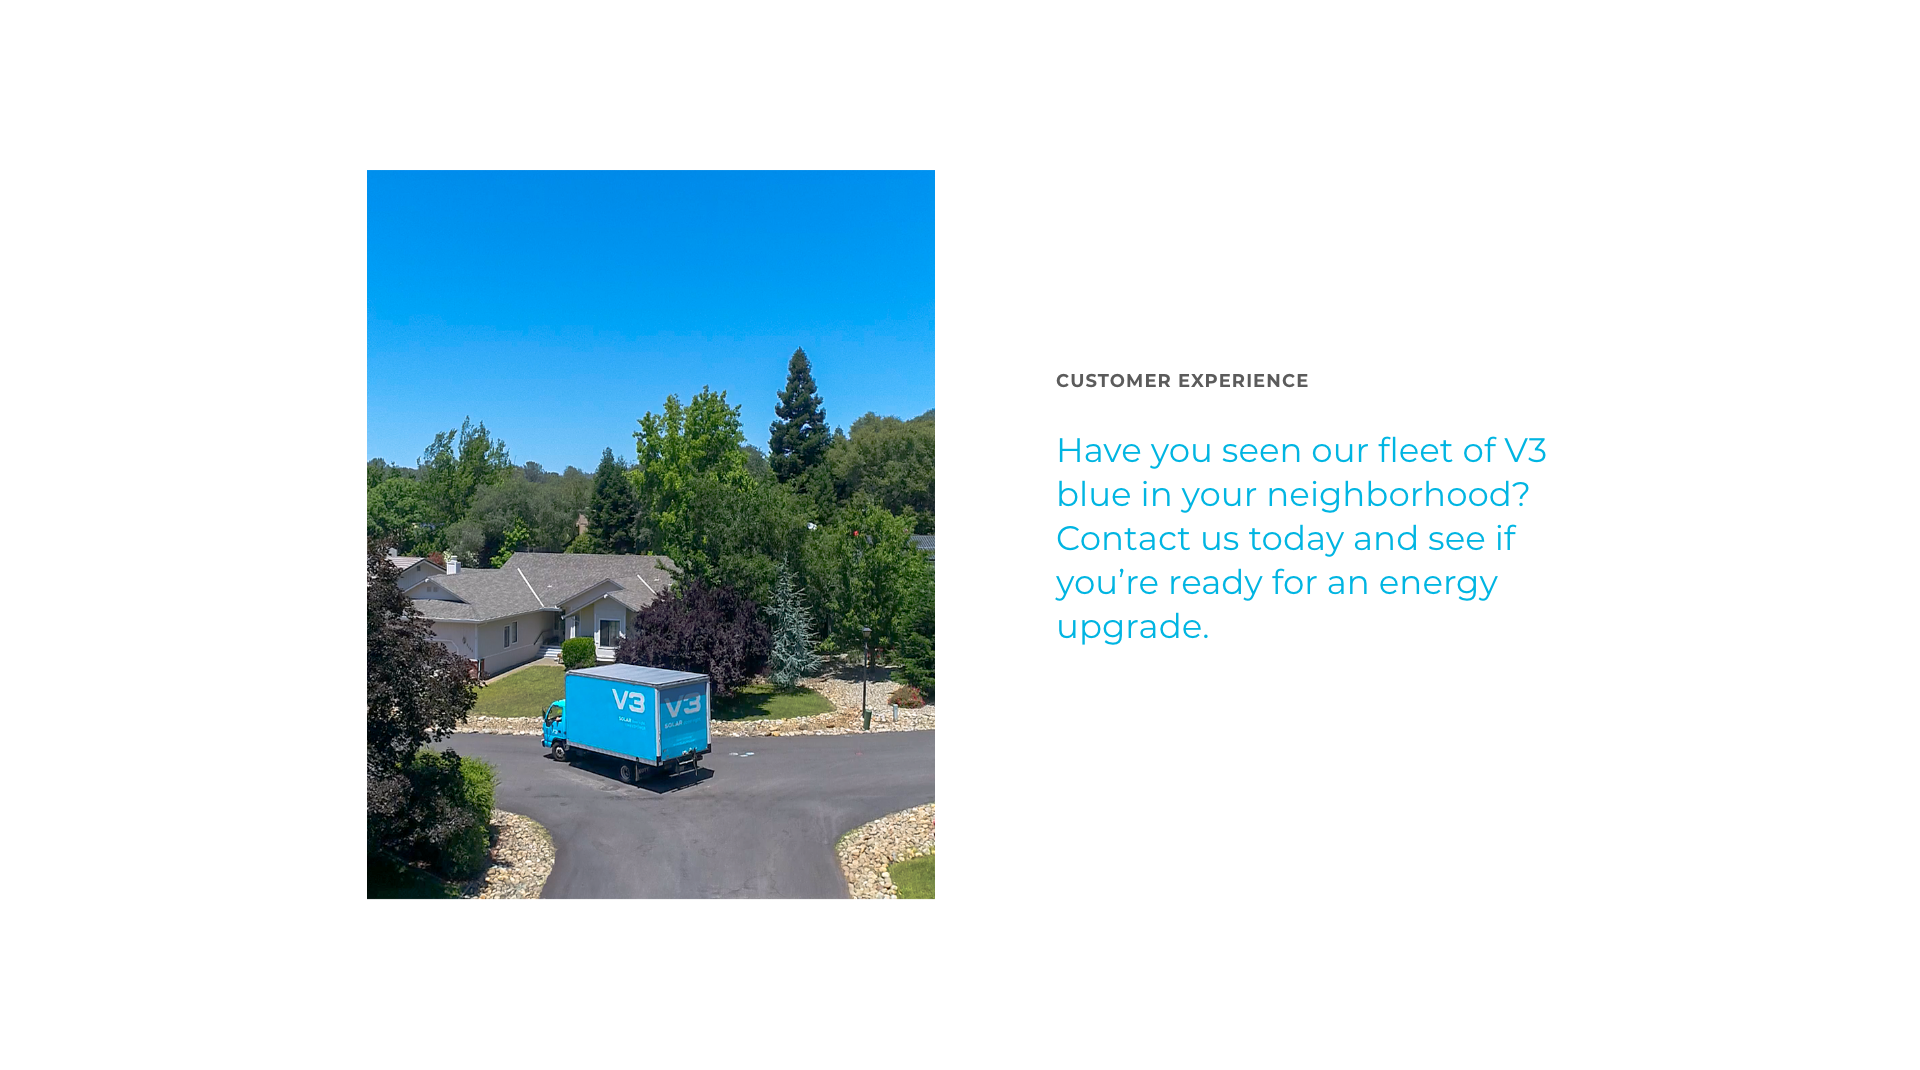 Customer Experience - Have you seen our fleet of V3 blue in your neighborhood? Contact us today and see if you're ready for an energy upgrade